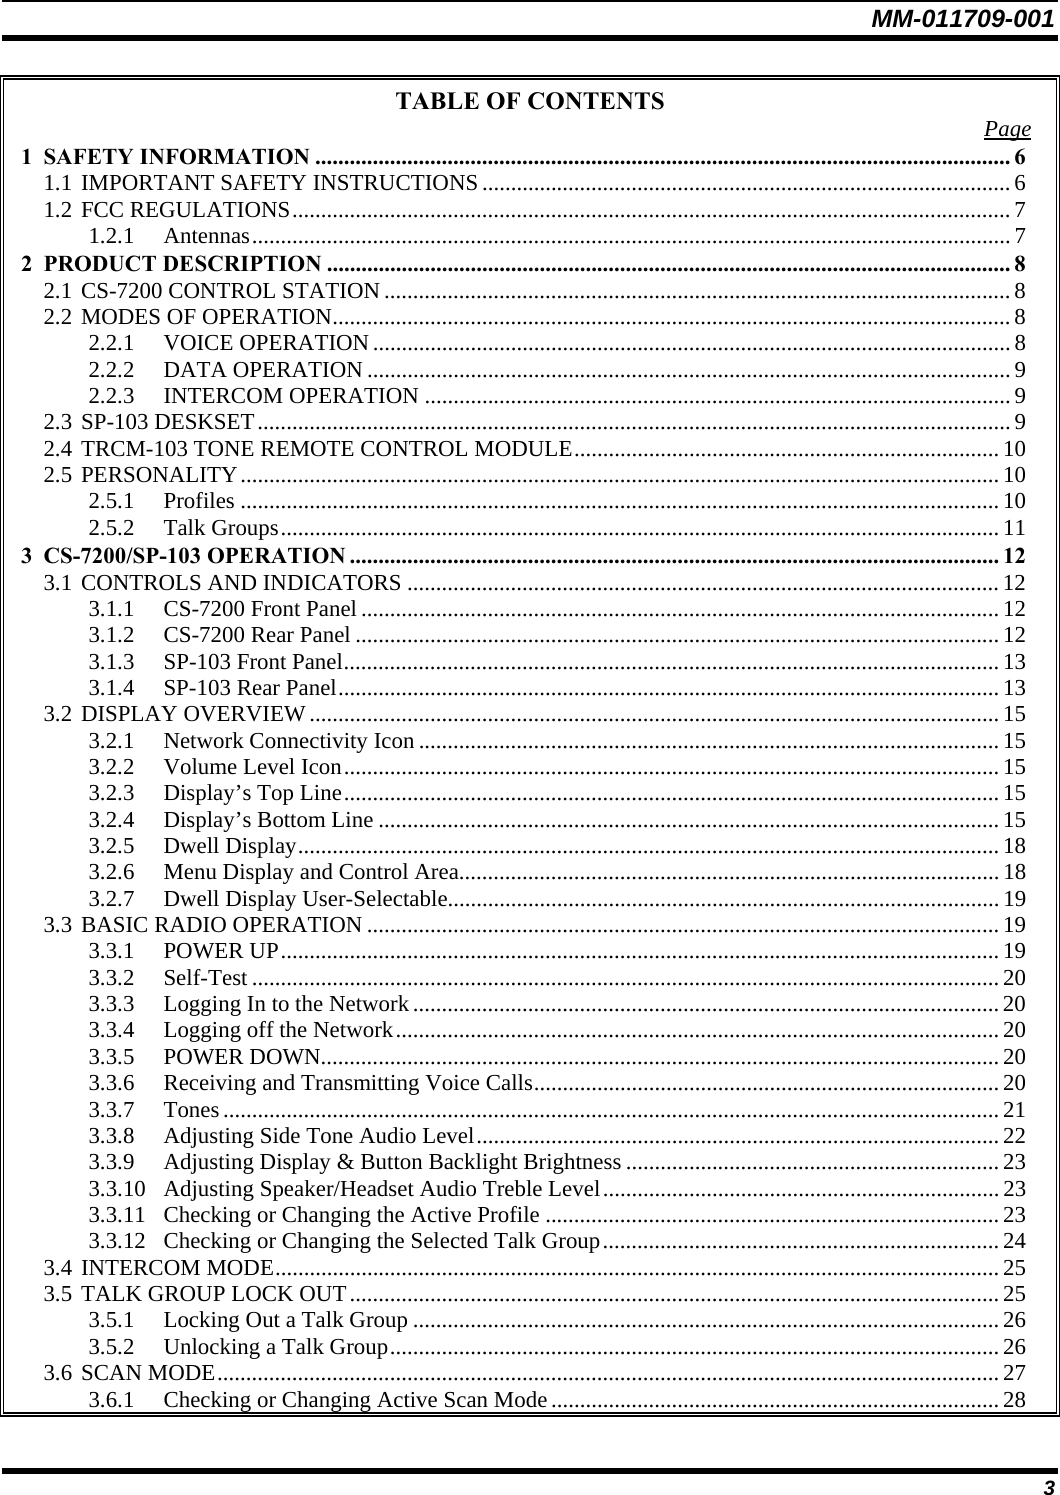 MM-011709-001 3 TABLE OF CONTENTS  Page 1 SAFETY INFORMATION ......................................................................................................................... 6 1.1 IMPORTANT SAFETY INSTRUCTIONS............................................................................................ 6 1.2 FCC REGULATIONS............................................................................................................................. 7 1.2.1 Antennas.................................................................................................................................... 7 2 PRODUCT DESCRIPTION ....................................................................................................................... 8 2.1 CS-7200 CONTROL STATION............................................................................................................. 8 2.2 MODES OF OPERATION...................................................................................................................... 8 2.2.1 VOICE OPERATION...............................................................................................................8 2.2.2 DATA OPERATION ................................................................................................................ 9 2.2.3 INTERCOM OPERATION ......................................................................................................9 2.3 SP-103 DESKSET...................................................................................................................................9 2.4 TRCM-103 TONE REMOTE CONTROL MODULE.......................................................................... 10 2.5 PERSONALITY.................................................................................................................................... 10 2.5.1 Profiles .................................................................................................................................... 10 2.5.2 Talk Groups............................................................................................................................. 11 3 CS-7200/SP-103 OPERATION ................................................................................................................. 12 3.1 CONTROLS AND INDICATORS ....................................................................................................... 12 3.1.1 CS-7200 Front Panel ............................................................................................................... 12 3.1.2 CS-7200 Rear Panel ................................................................................................................ 12 3.1.3 SP-103 Front Panel.................................................................................................................. 13 3.1.4 SP-103 Rear Panel................................................................................................................... 13 3.2 DISPLAY OVERVIEW........................................................................................................................ 15 3.2.1 Network Connectivity Icon ..................................................................................................... 15 3.2.2 Volume Level Icon.................................................................................................................. 15 3.2.3 Display’s Top Line.................................................................................................................. 15 3.2.4 Display’s Bottom Line ............................................................................................................ 15 3.2.5 Dwell Display.......................................................................................................................... 18 3.2.6 Menu Display and Control Area..............................................................................................18 3.2.7 Dwell Display User-Selectable................................................................................................19 3.3 BASIC RADIO OPERATION .............................................................................................................. 19 3.3.1 POWER UP............................................................................................................................. 19 3.3.2 Self-Test .................................................................................................................................. 20 3.3.3 Logging In to the Network......................................................................................................20 3.3.4 Logging off the Network.........................................................................................................20 3.3.5 POWER DOWN......................................................................................................................20 3.3.6 Receiving and Transmitting Voice Calls................................................................................. 20 3.3.7 Tones....................................................................................................................................... 21 3.3.8 Adjusting Side Tone Audio Level........................................................................................... 22 3.3.9 Adjusting Display &amp; Button Backlight Brightness ................................................................. 23 3.3.10 Adjusting Speaker/Headset Audio Treble Level..................................................................... 23 3.3.11 Checking or Changing the Active Profile ............................................................................... 23 3.3.12 Checking or Changing the Selected Talk Group..................................................................... 24 3.4 INTERCOM MODE.............................................................................................................................. 25 3.5 TALK GROUP LOCK OUT................................................................................................................. 25 3.5.1 Locking Out a Talk Group ...................................................................................................... 26 3.5.2 Unlocking a Talk Group..........................................................................................................26 3.6 SCAN MODE........................................................................................................................................ 27 3.6.1 Checking or Changing Active Scan Mode.............................................................................. 28 